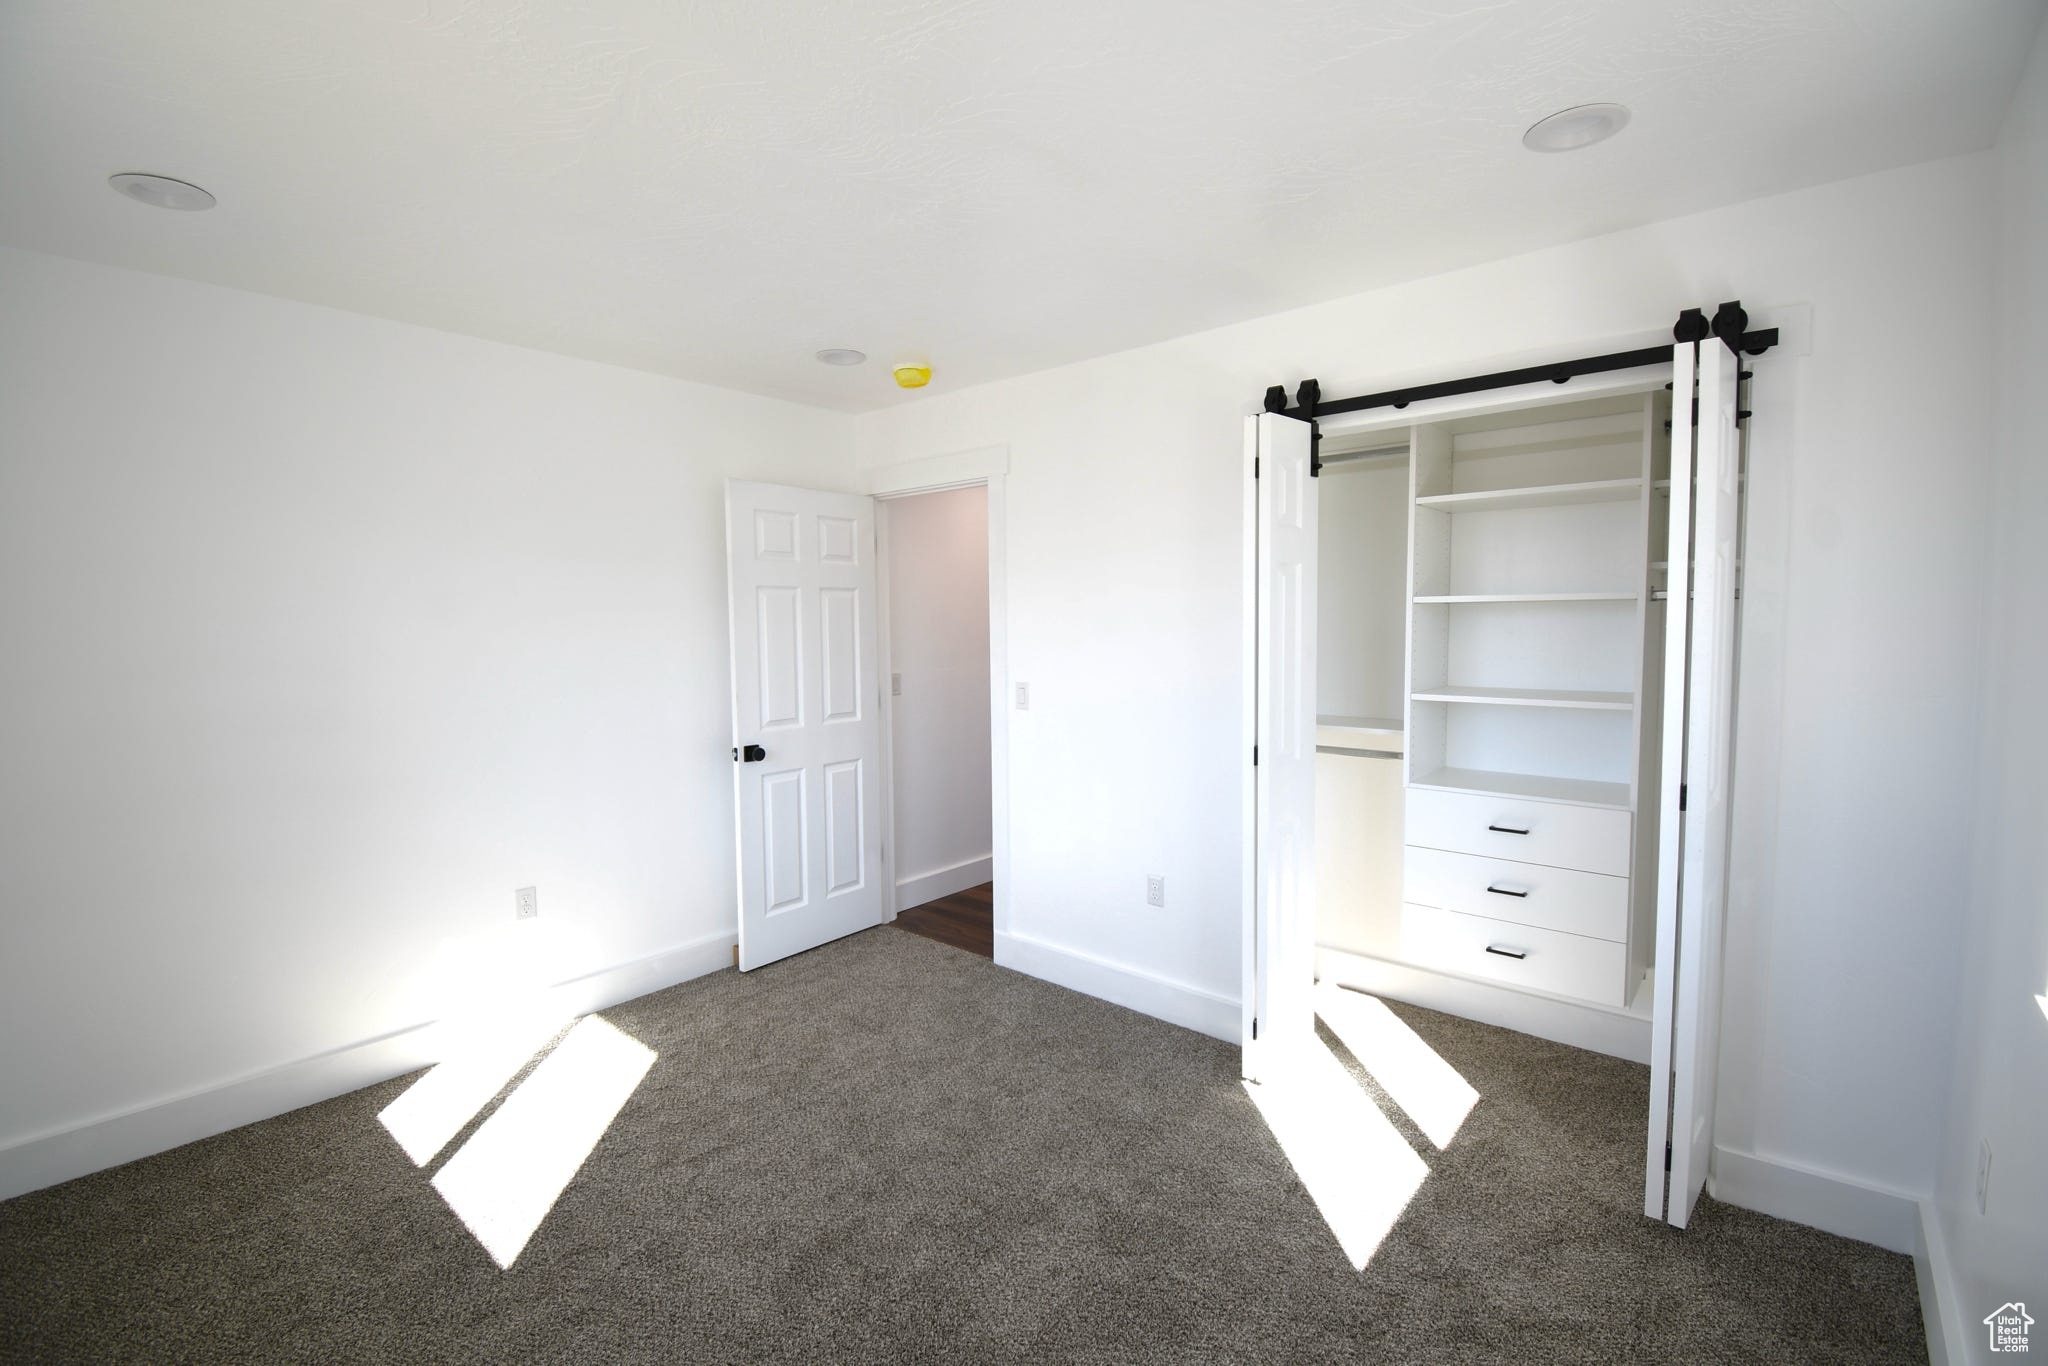 Unfurnished bedroom with a barn door and dark colored carpet